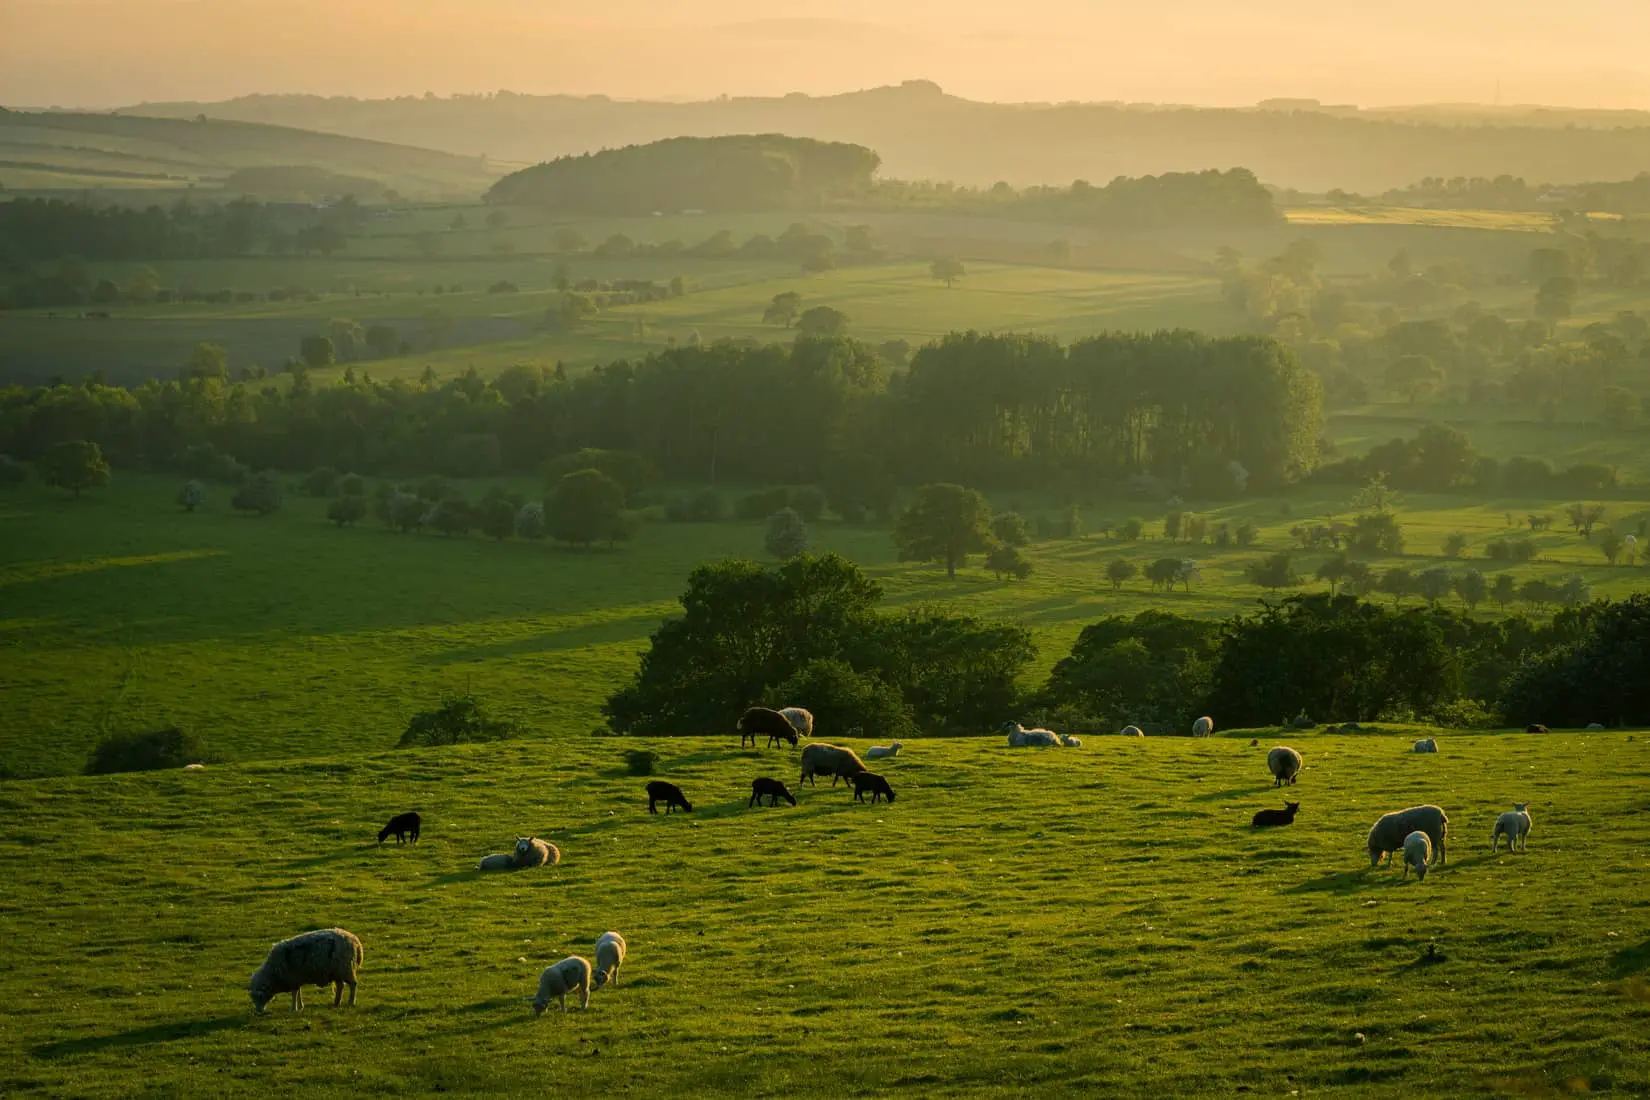 green rolling hills and sheeps in the foreground